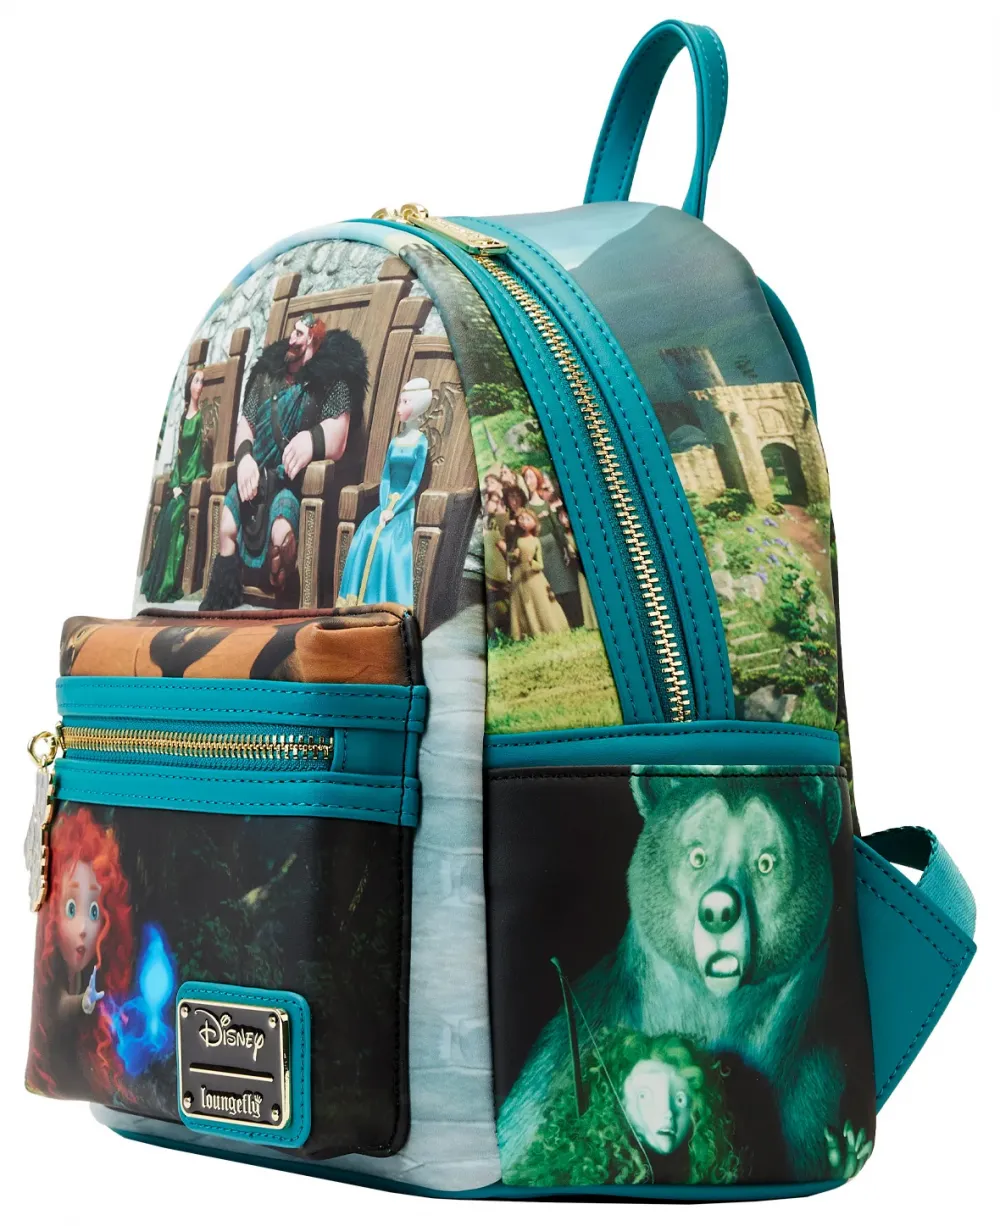 Brave Princess Scenes Mini Backpack Loungefly